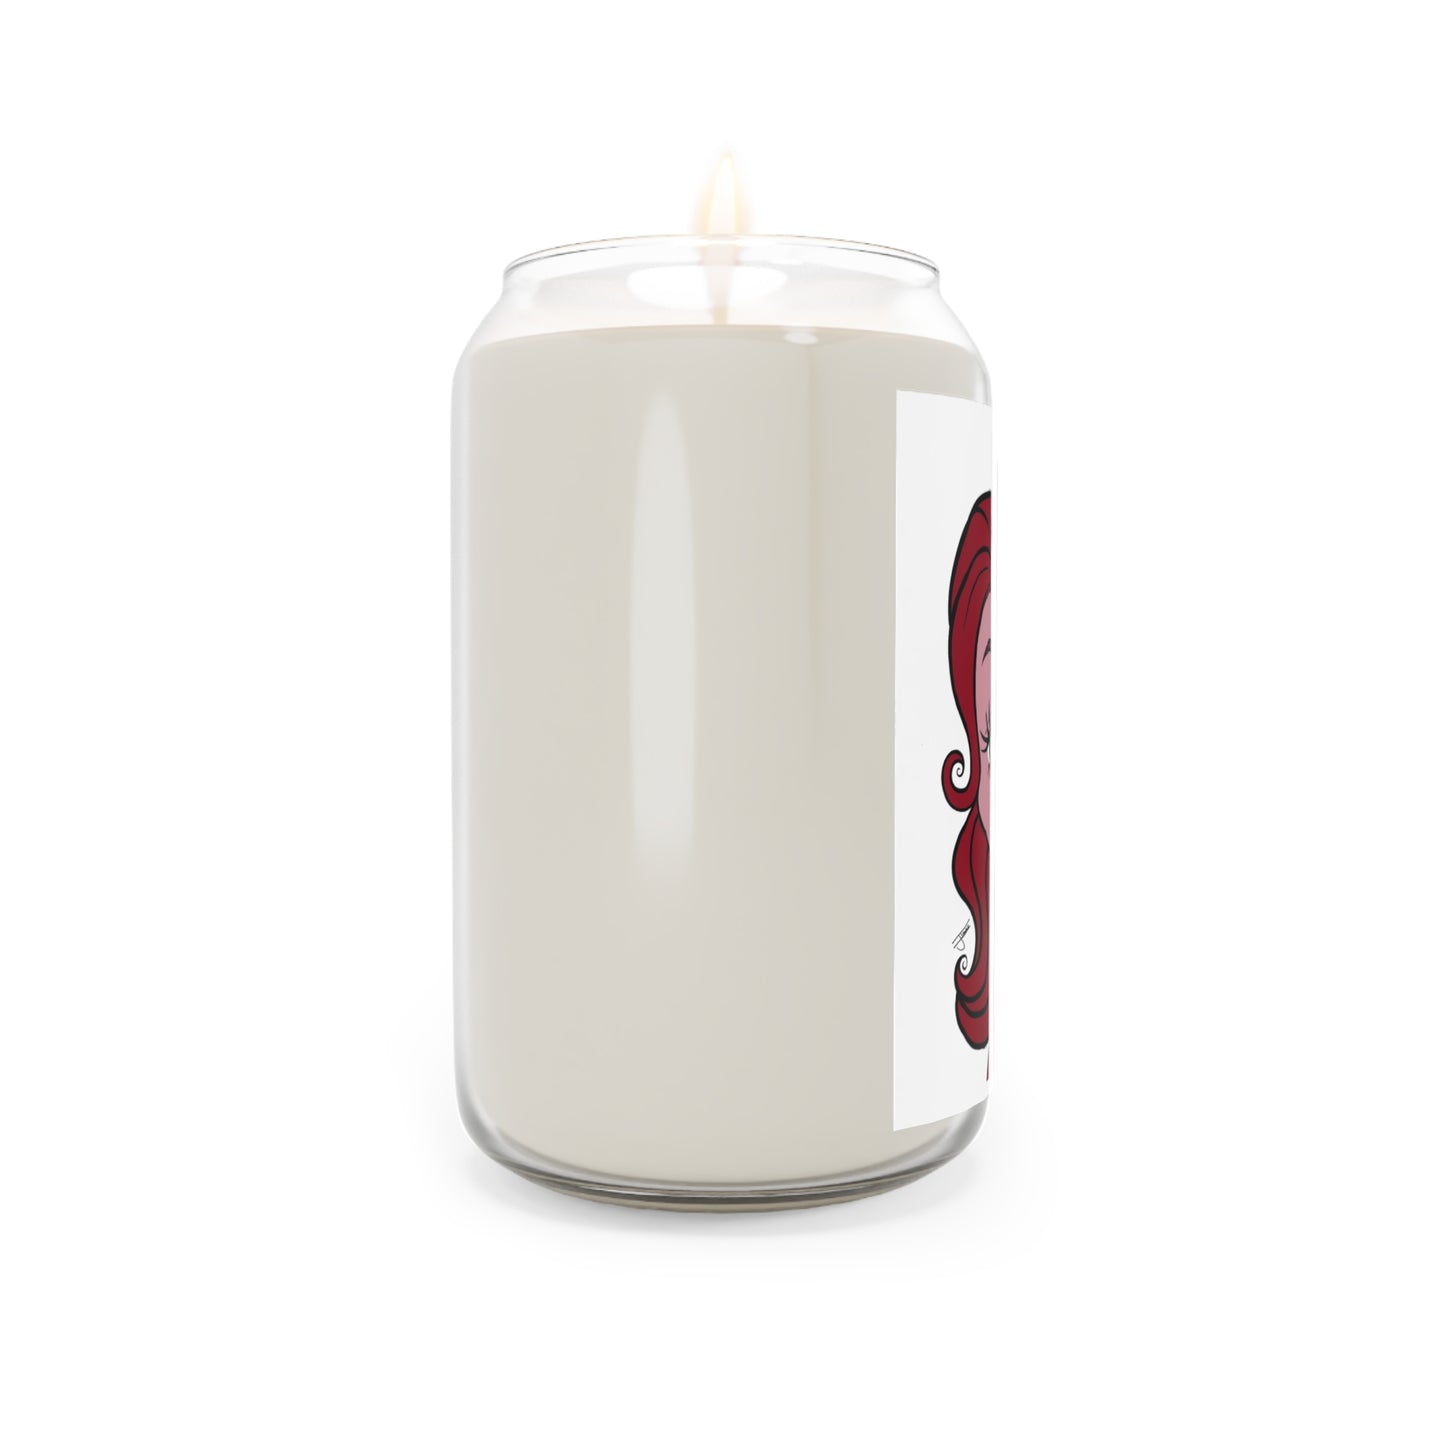 Miss Libra Scented Candle LARGE